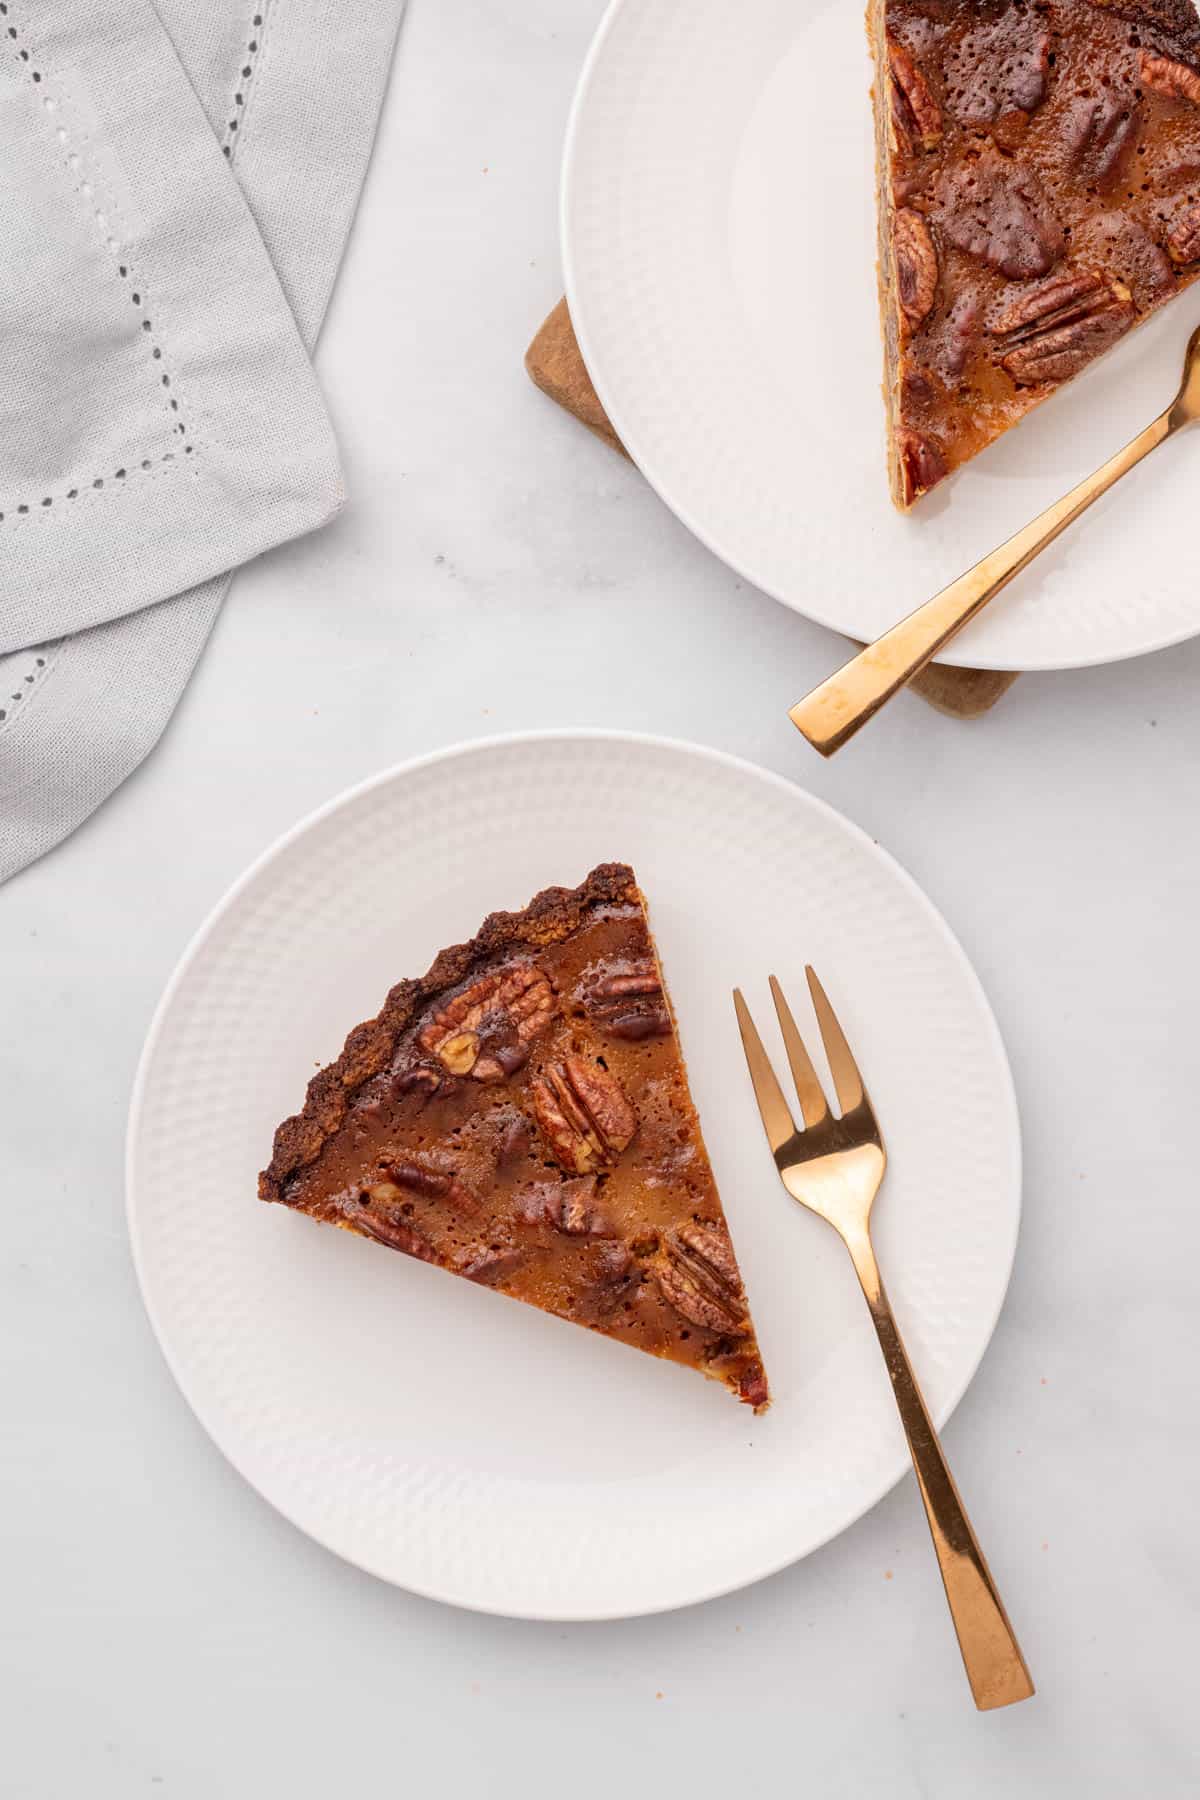 Two slices of pecan pie on white plates with gold forks, as seen from above